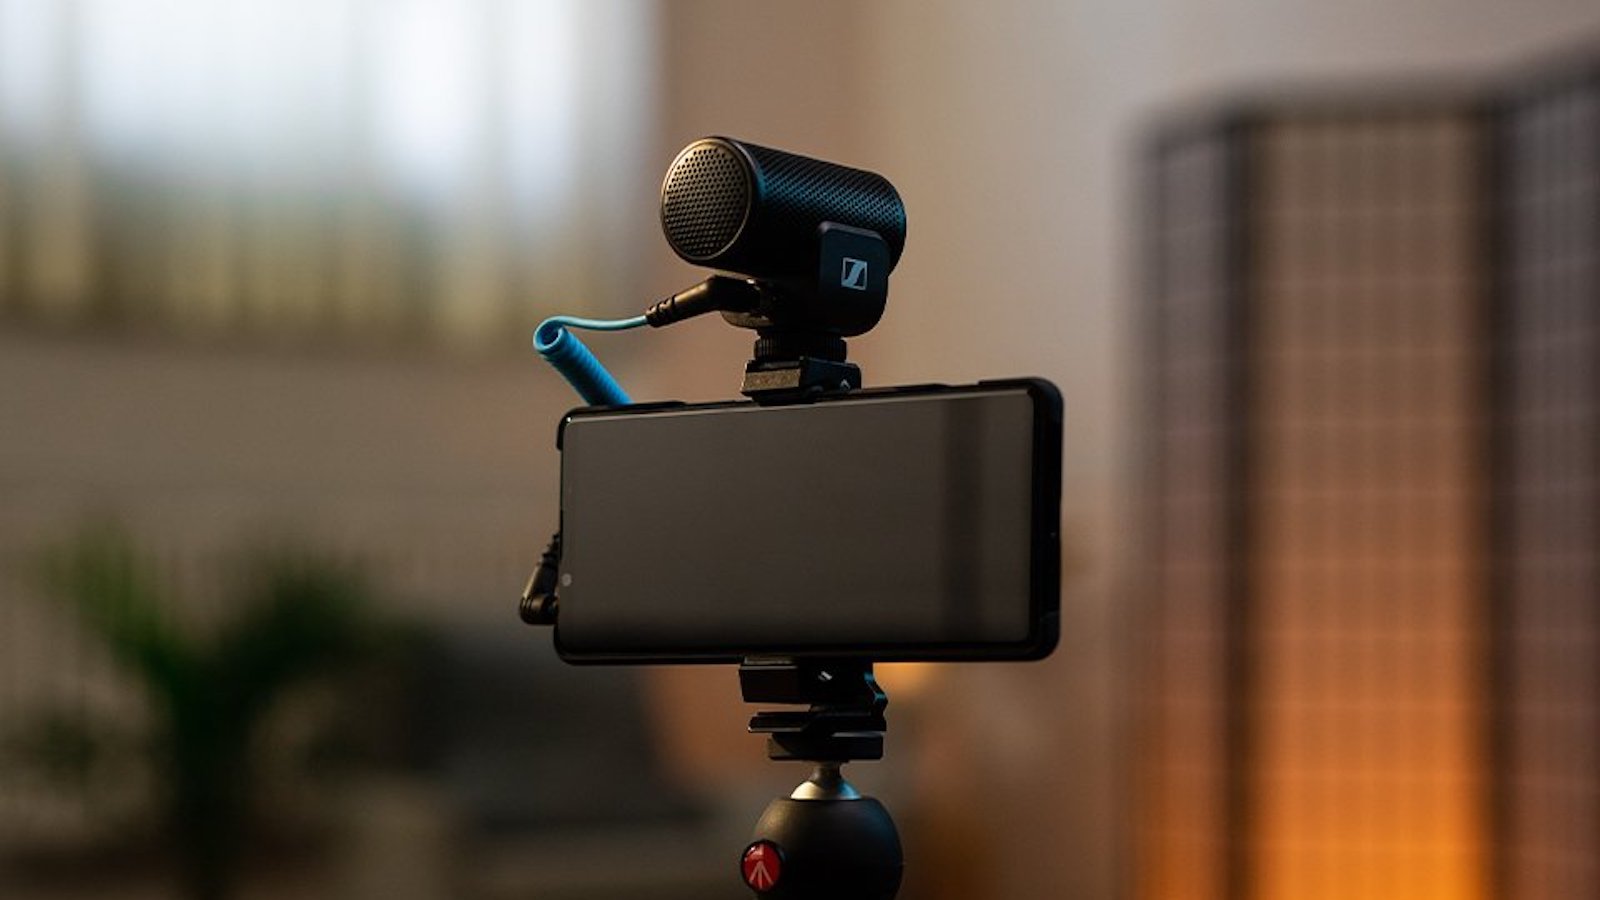 Sennheiser MKE 200 Mobile Kit has a directional on-camera microphone and Smartphone Clamp